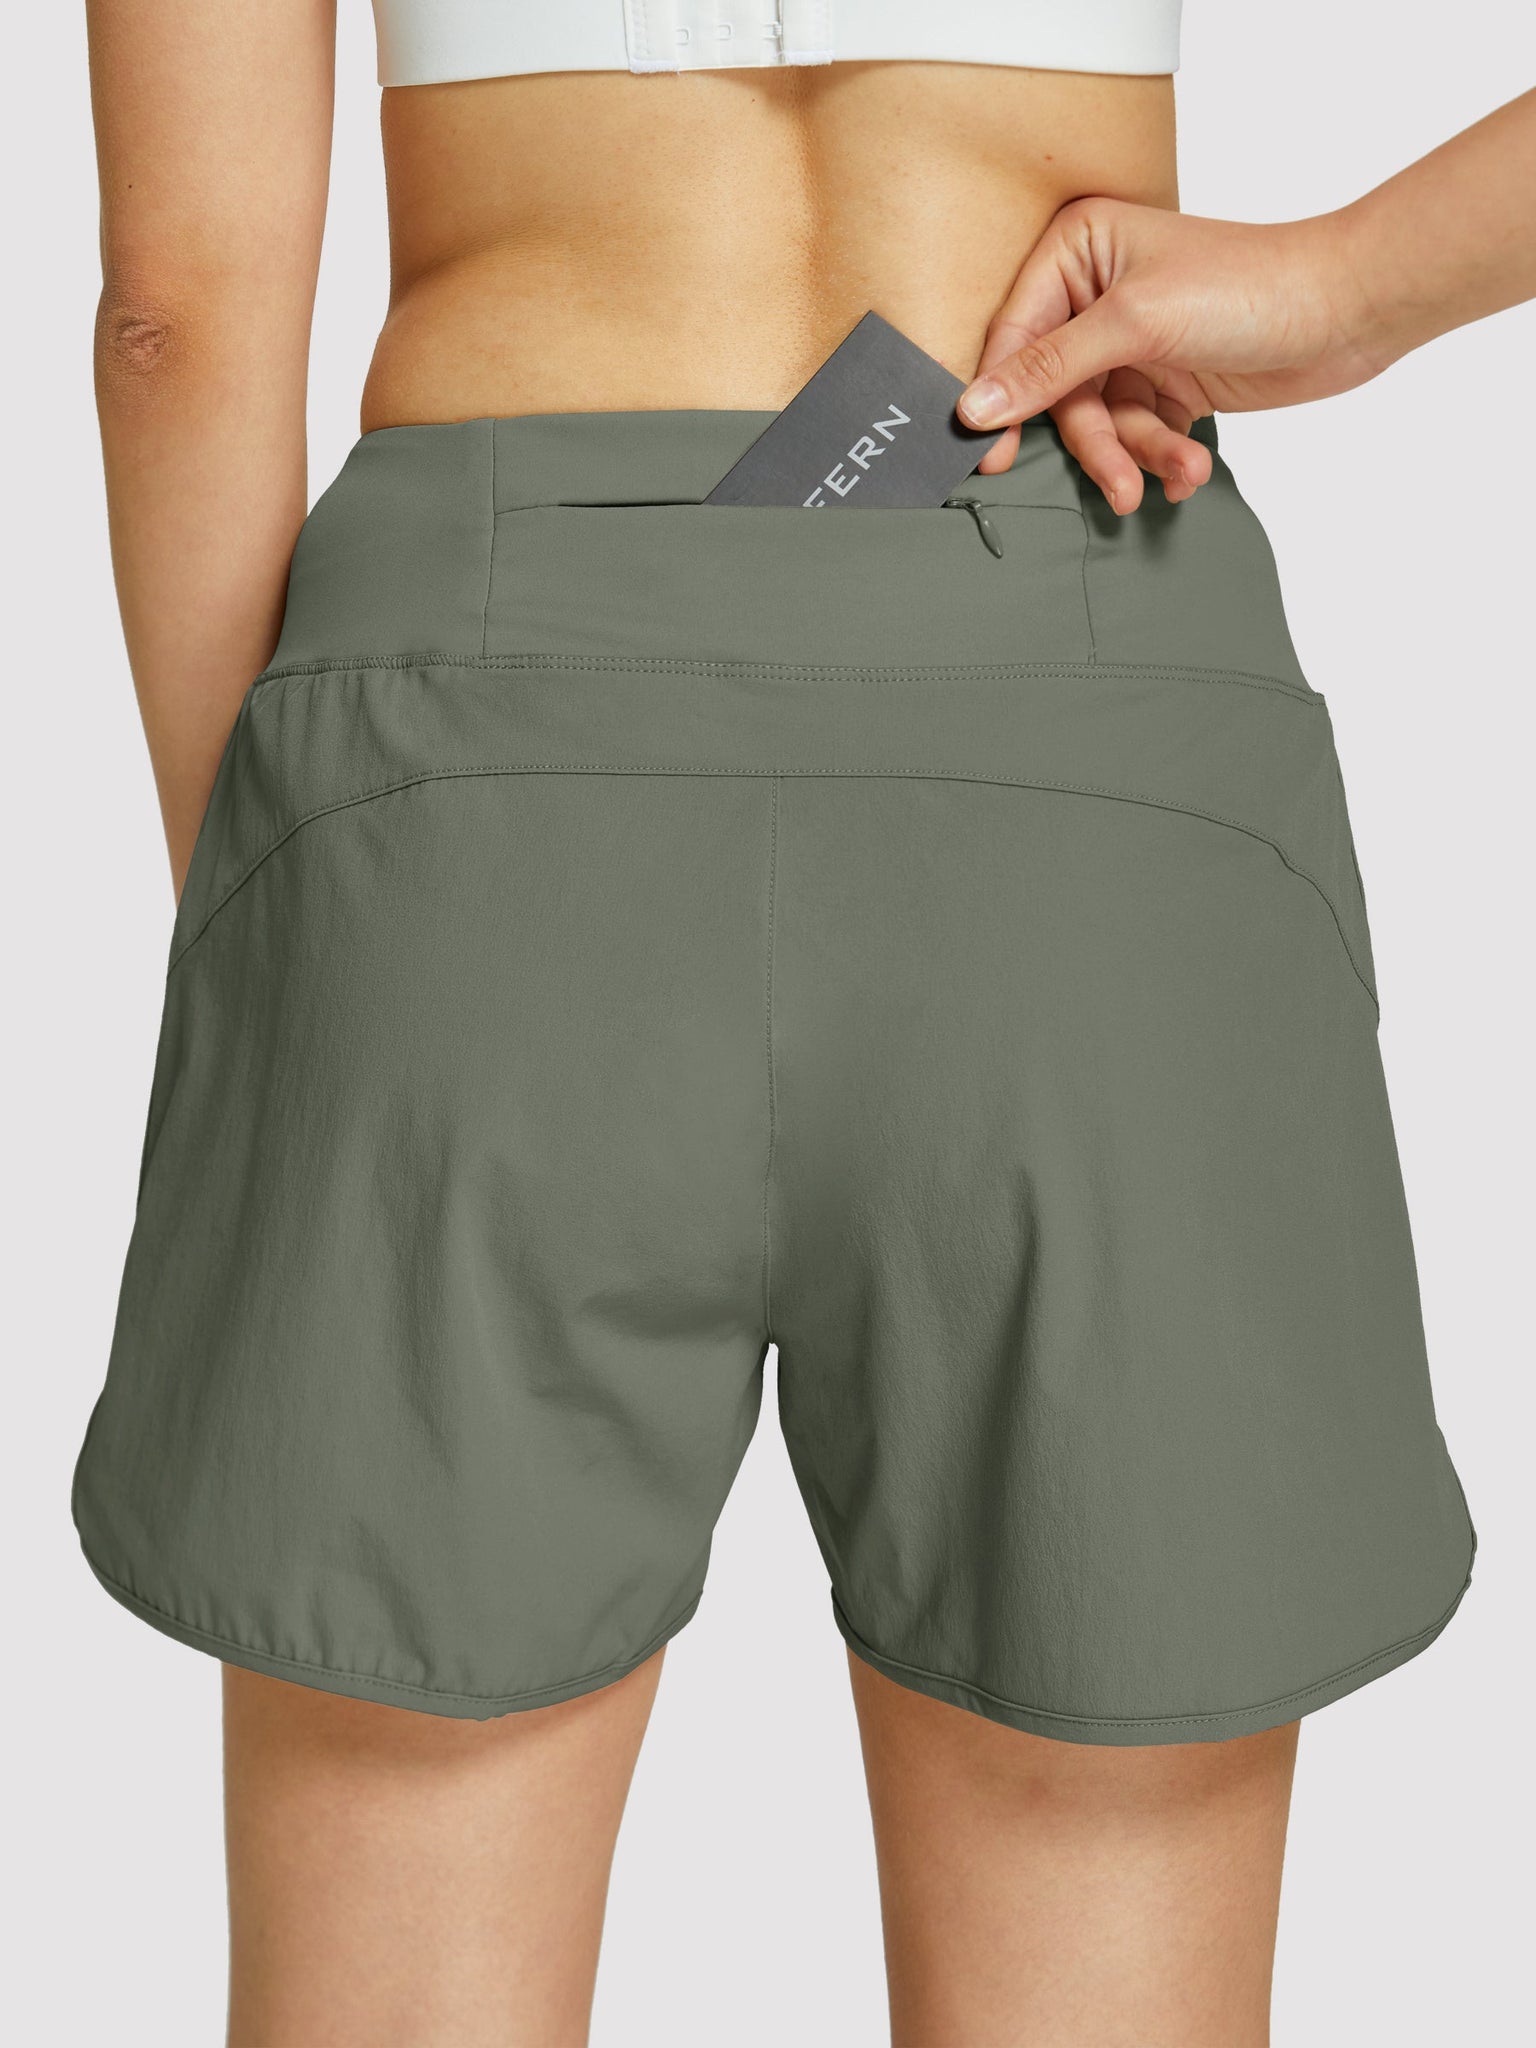 Womens High Rise Running Athletic Shorts_Green3